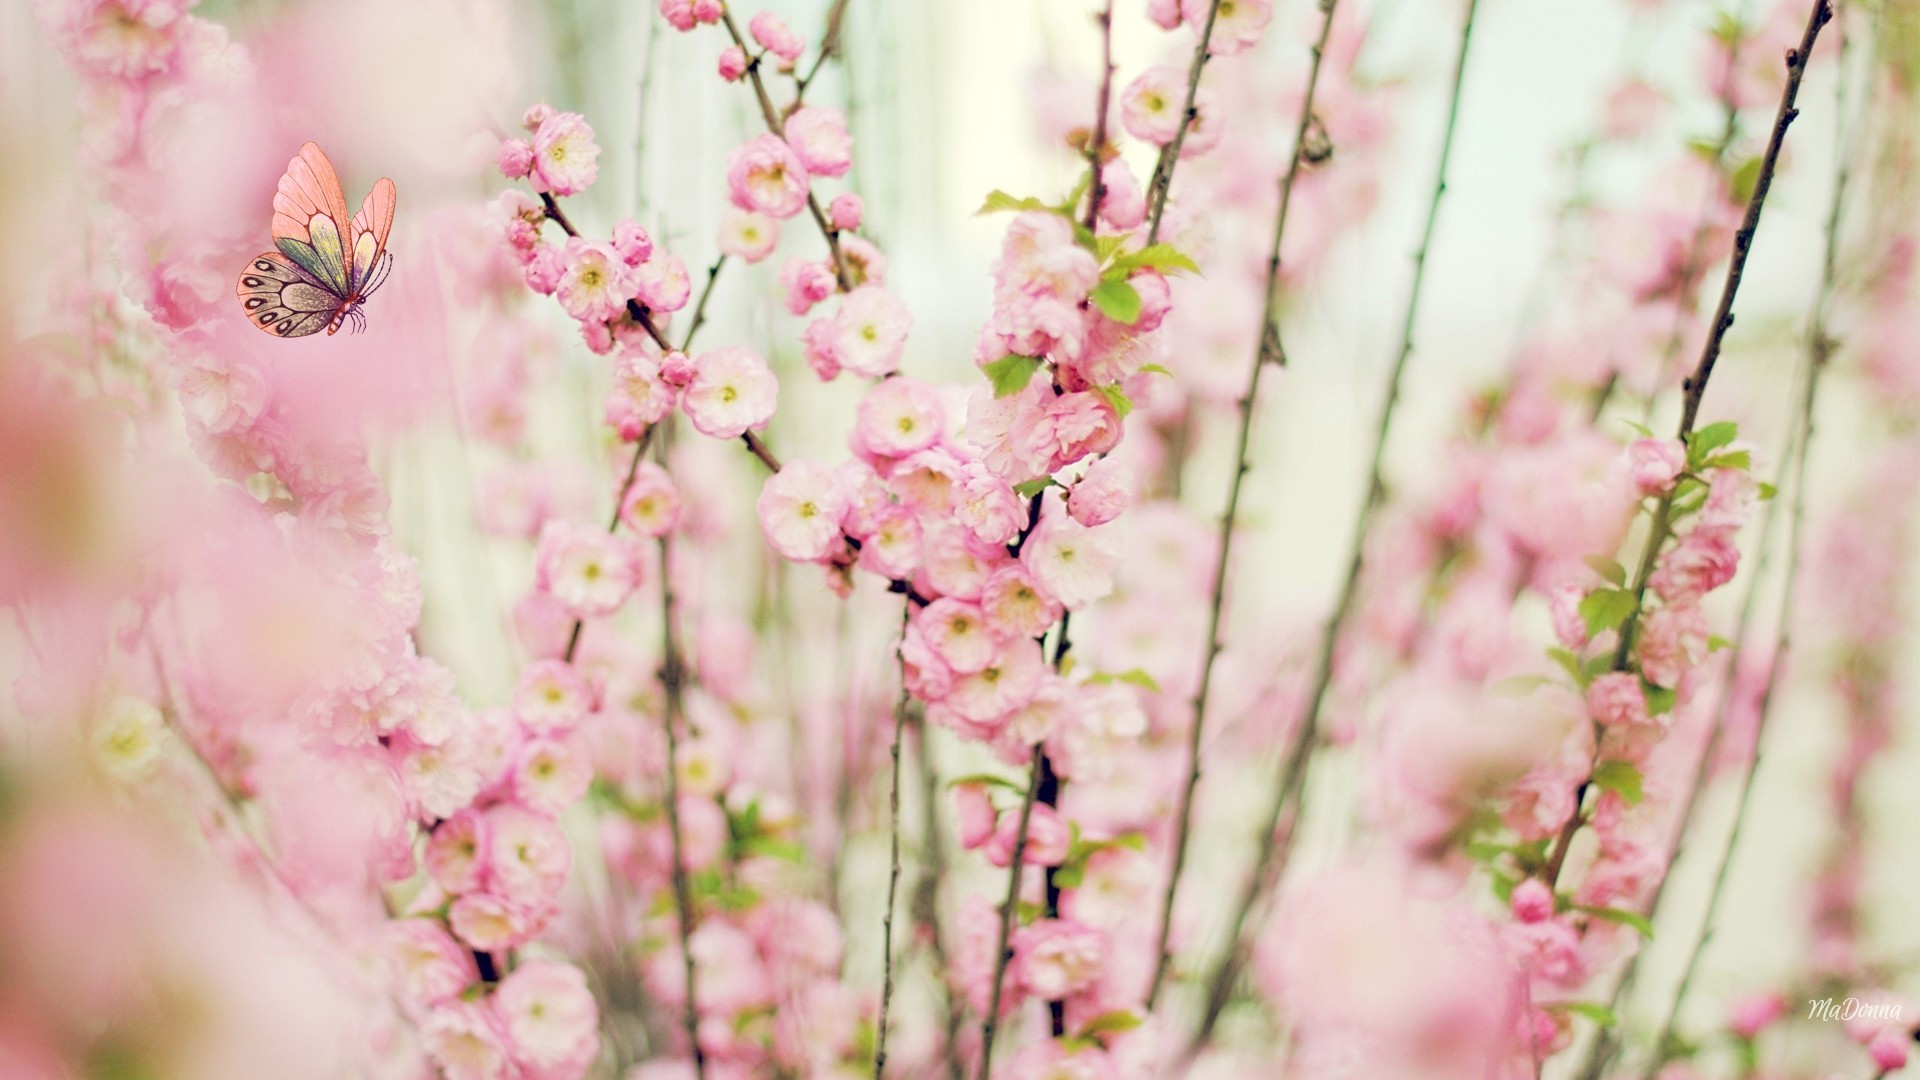 Flowers: Blooms Blossoms Dainty Pink Spring Fragrant Flowers Tiny ...